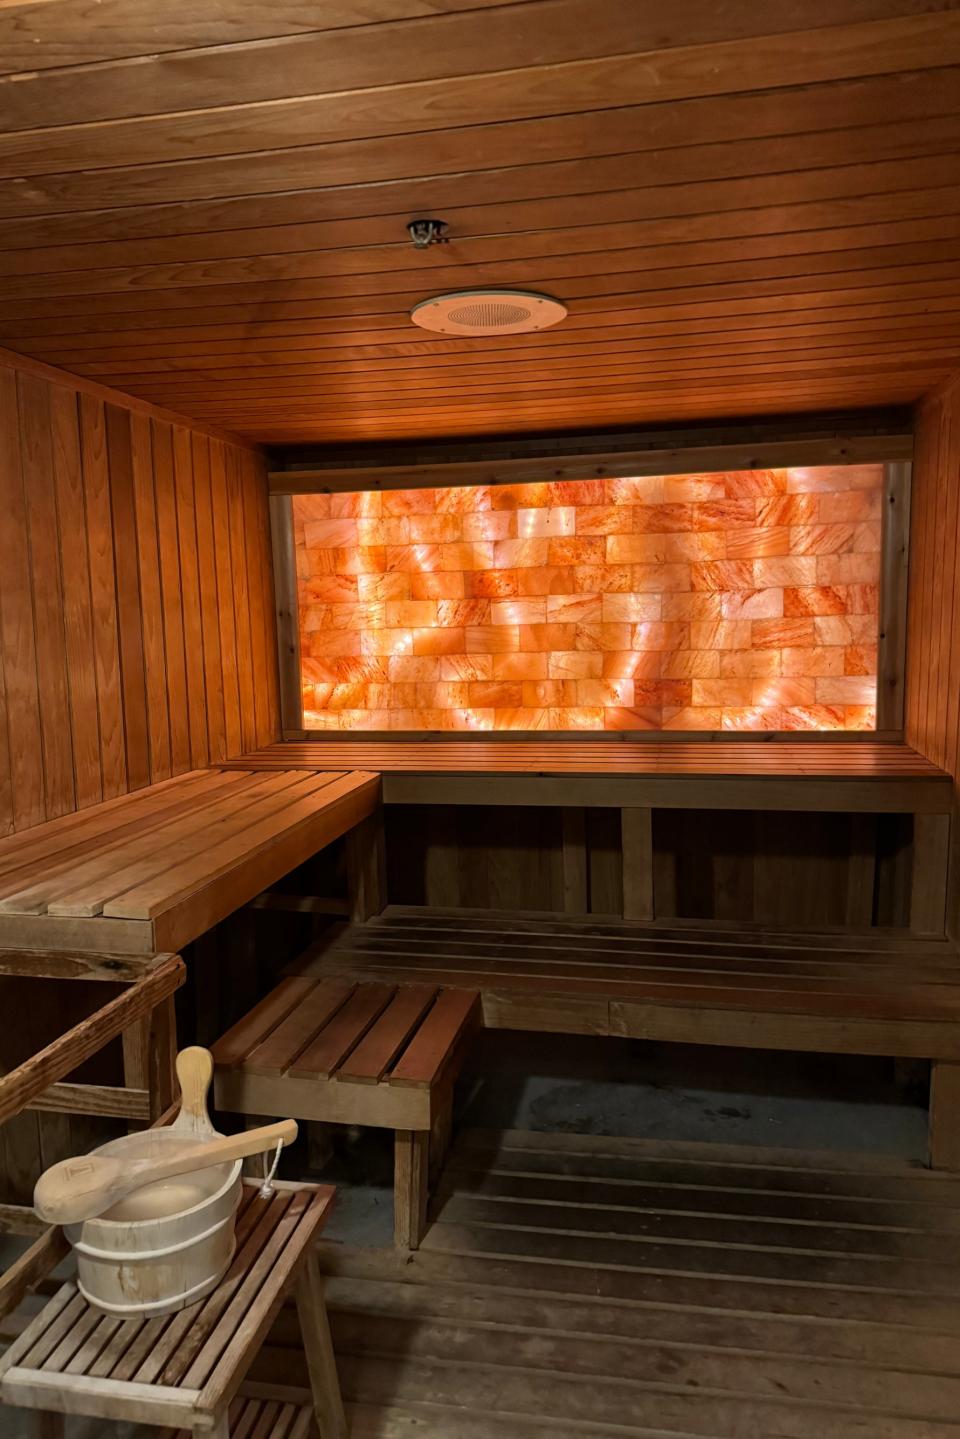 A wooden sauna with benches and a large salt wall, including a ladle and bucket